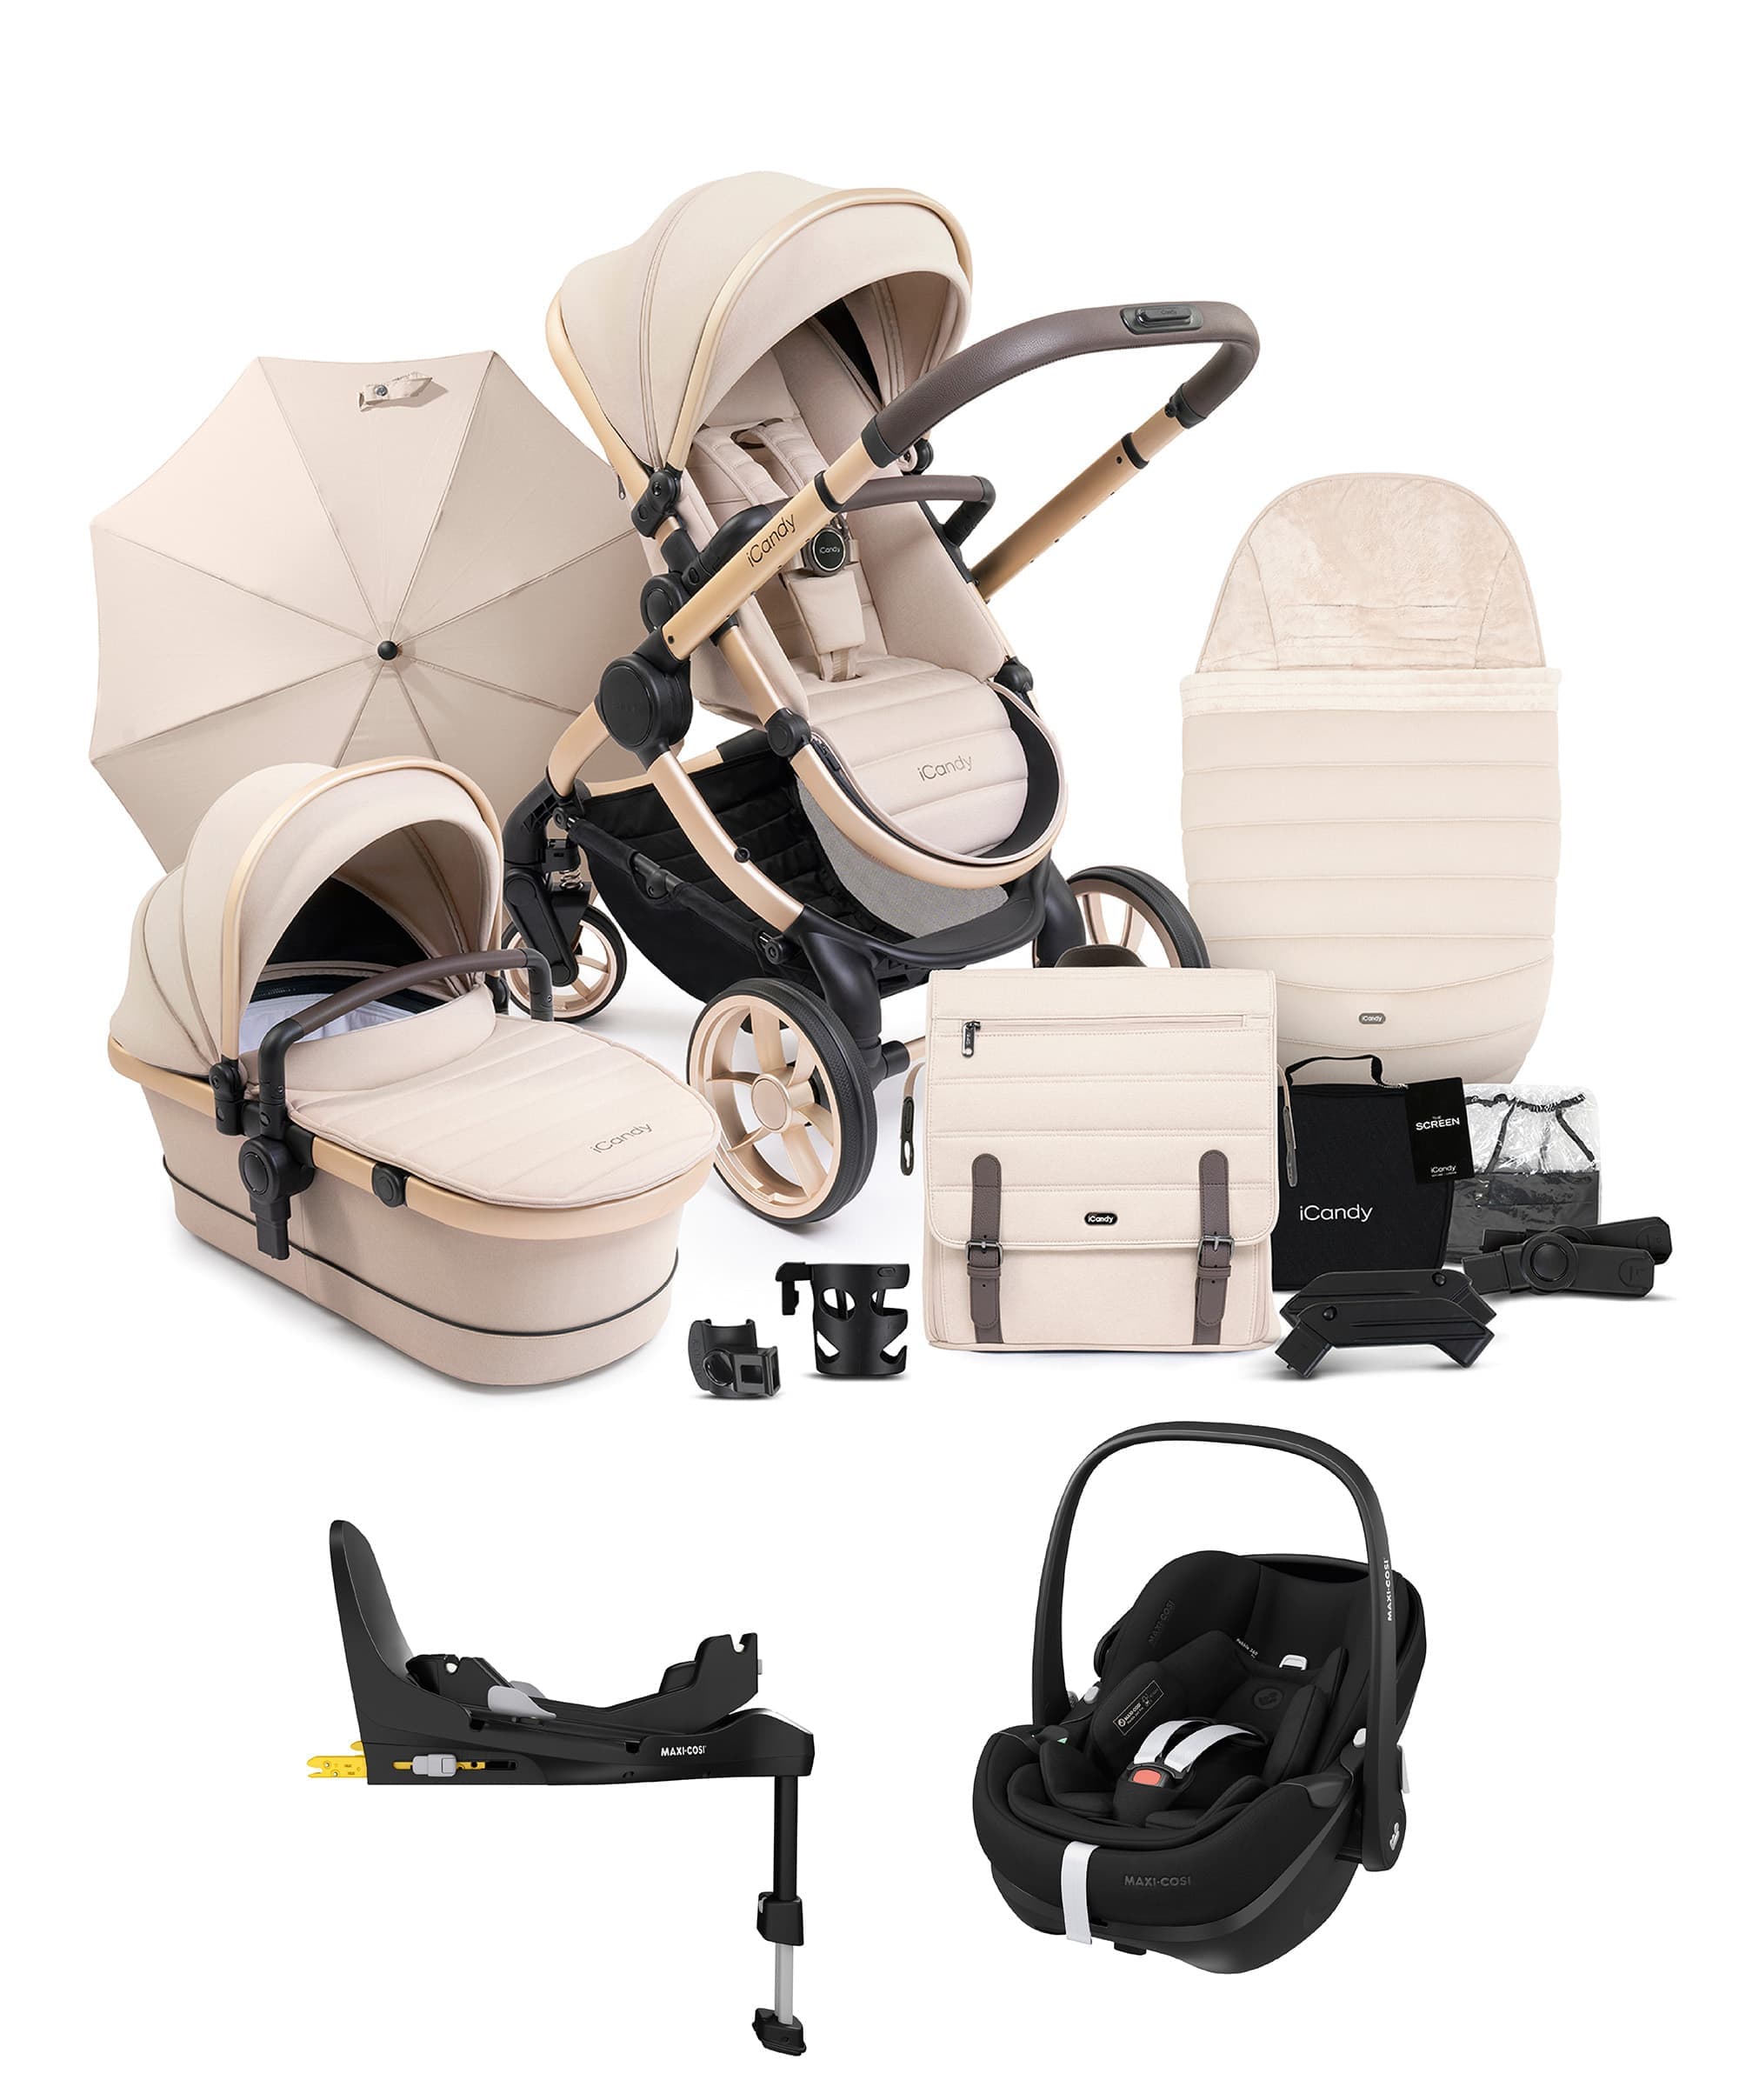 iCandy Peach 7 Complete Pushchair Bundle with Maxi-Cosi Pebble 360 Pro Car Seat & Base - Biscotti